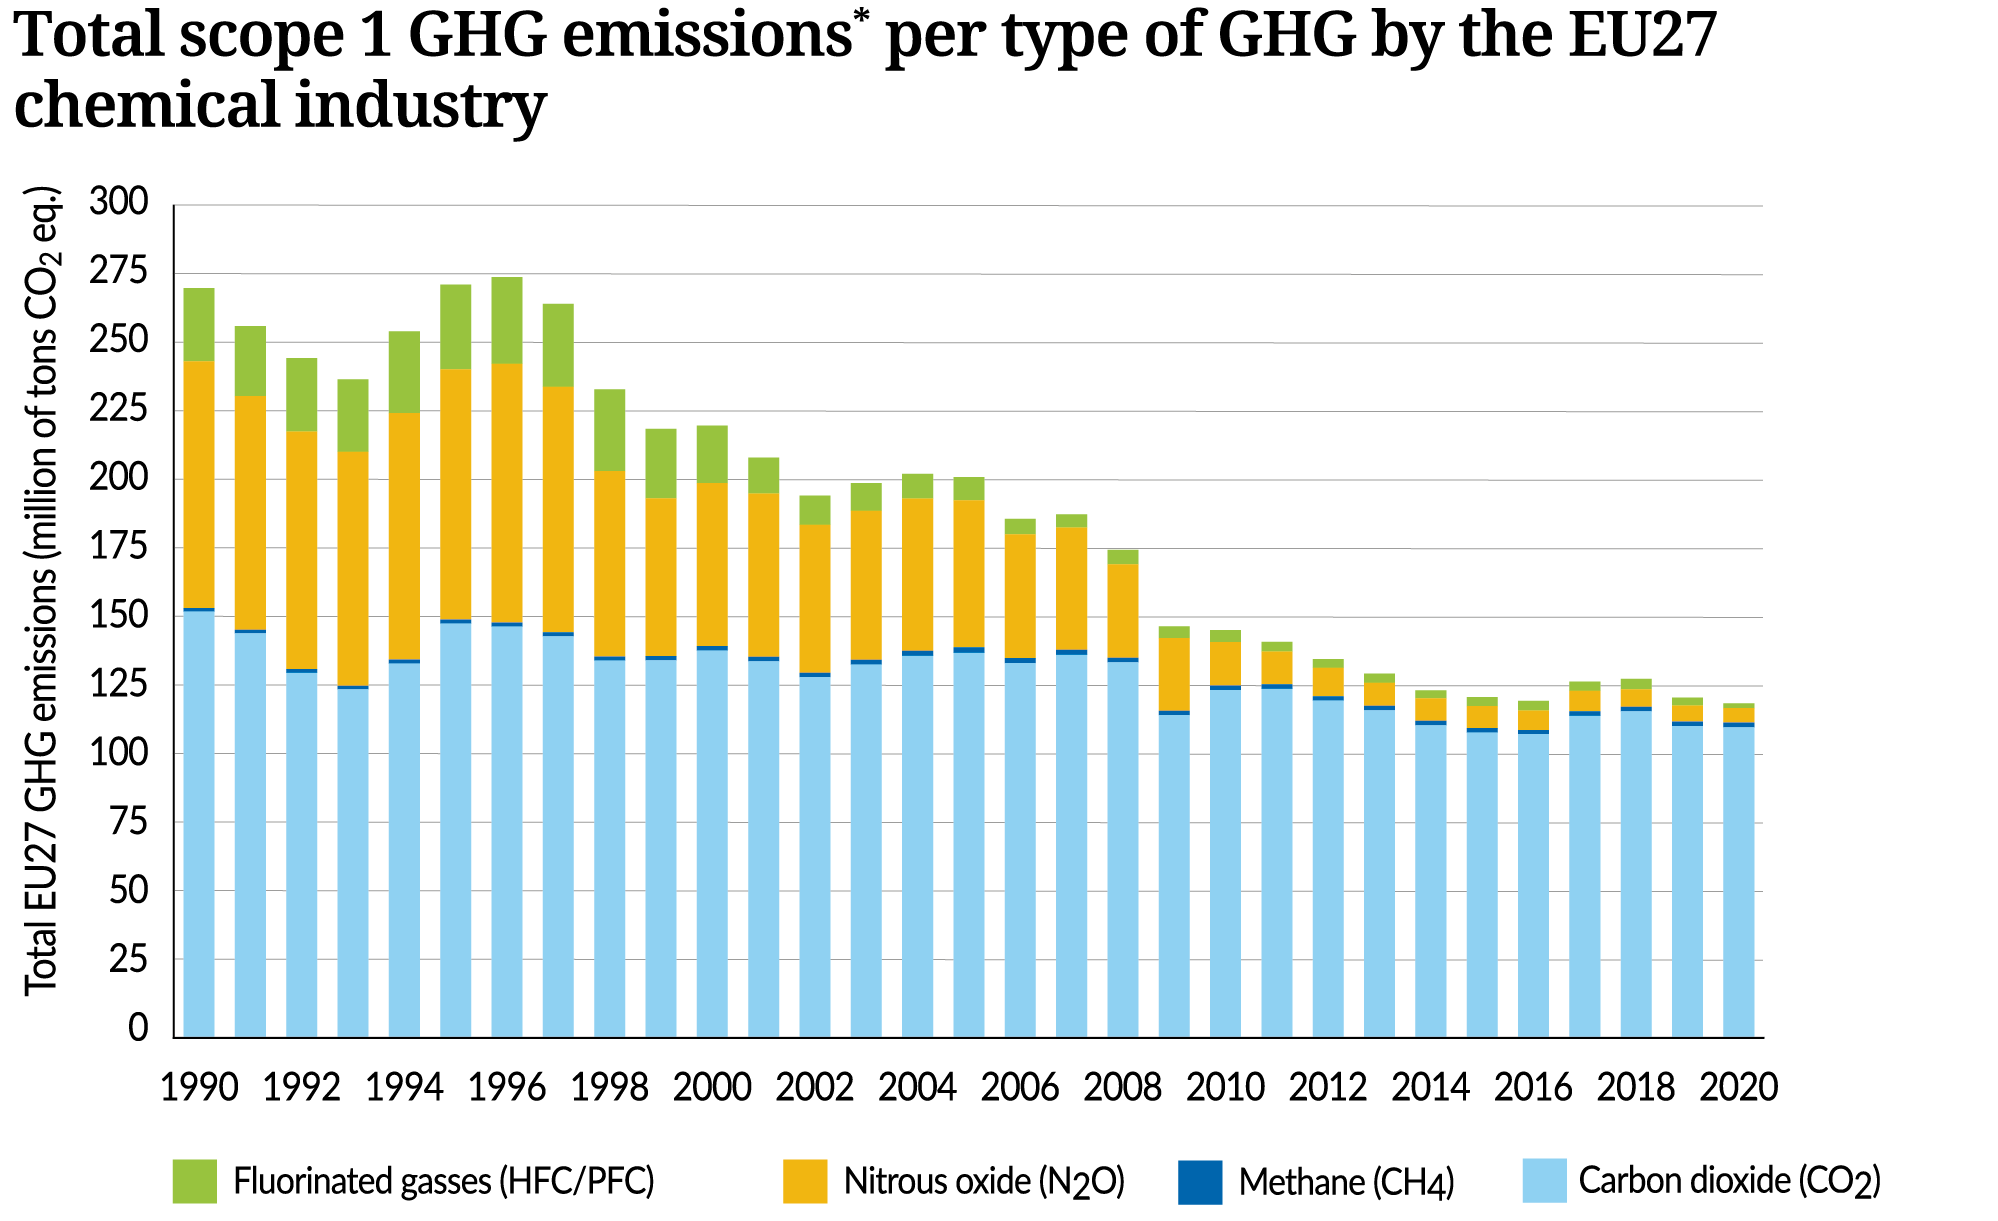 Total scope 1 GHG emissions per type of GHG by EU27 chemical industry